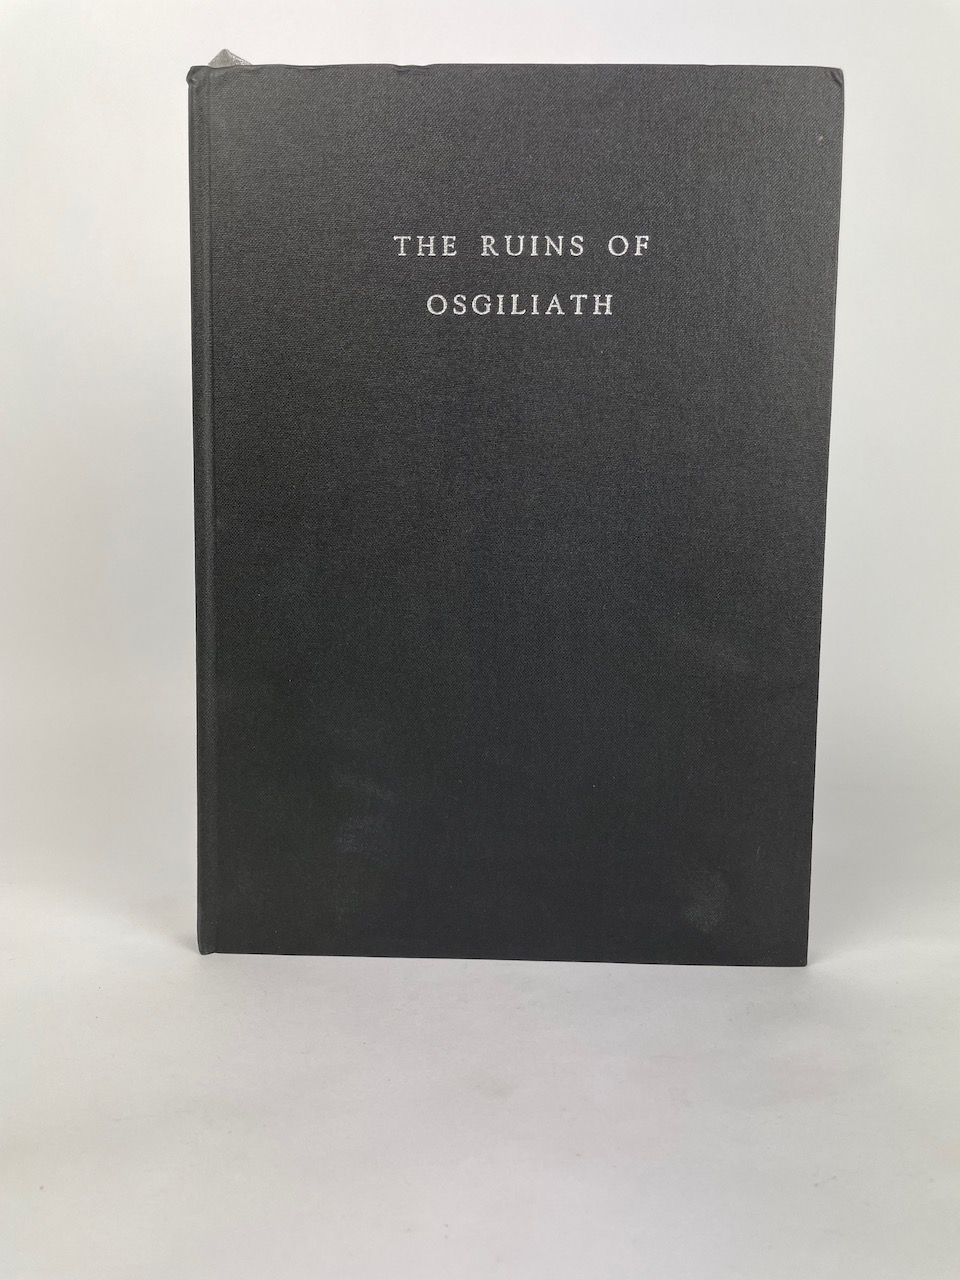 The Ruins of Osgiliath, Signed Limited Numbered Edition, nr 25 of 100 1